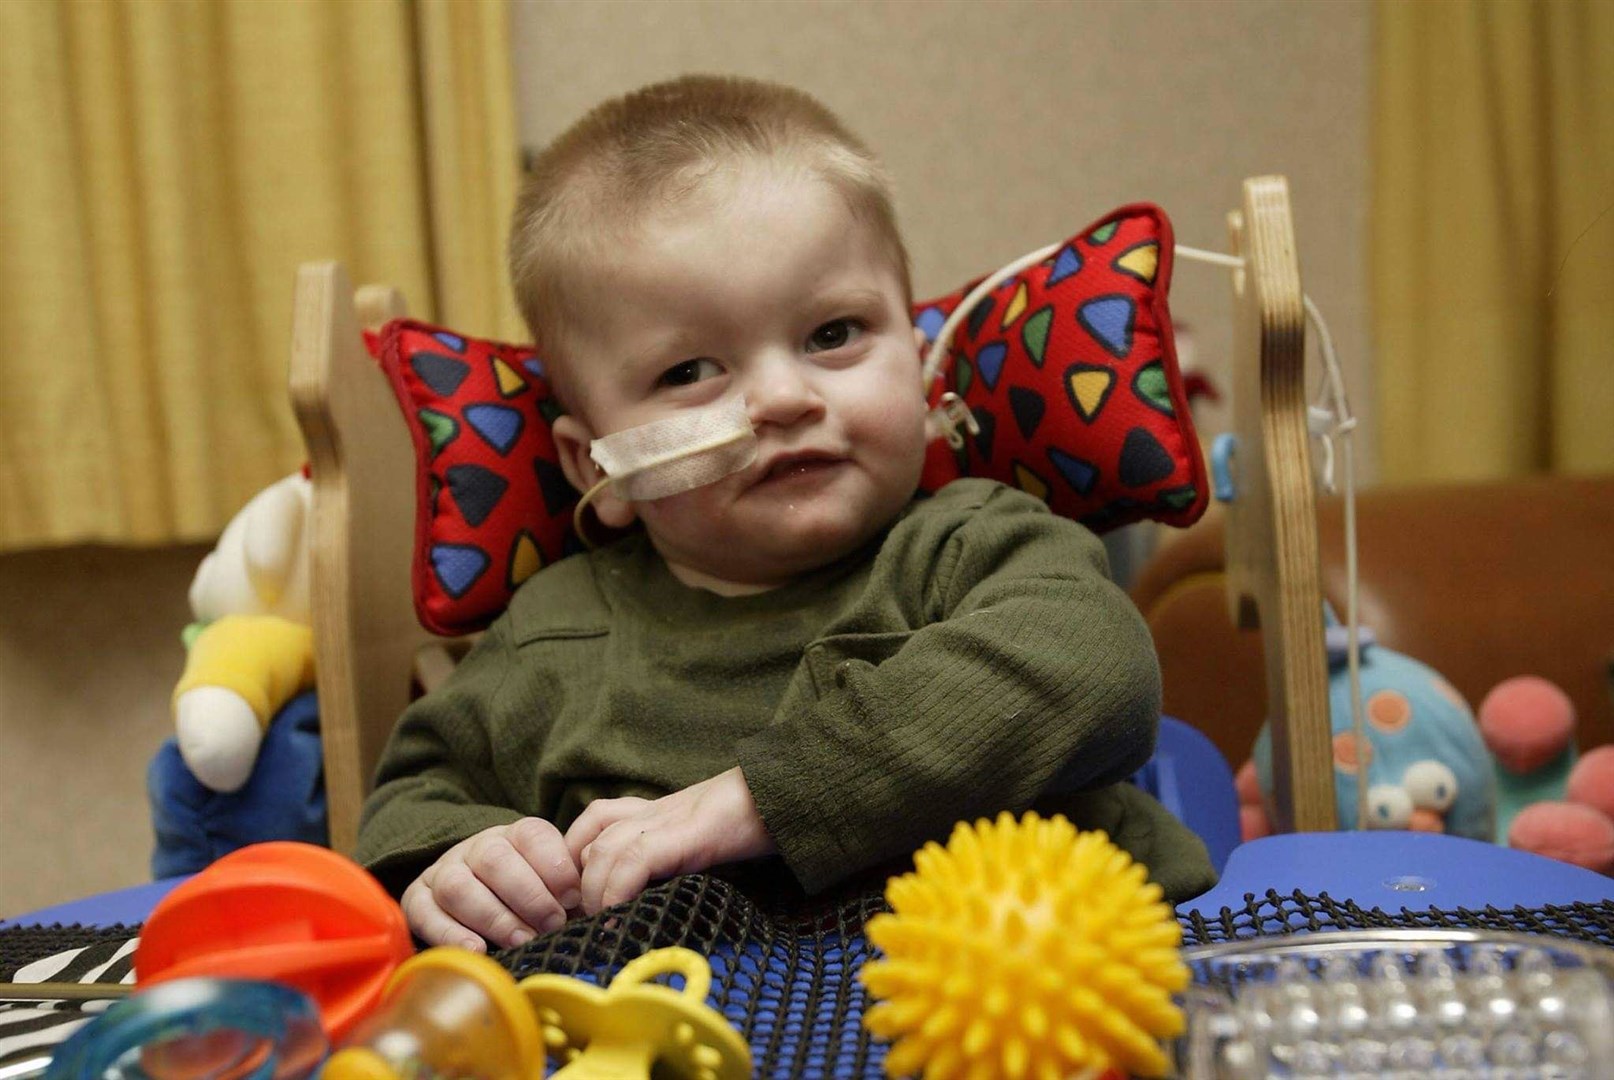 Ethan's care at the hospice was a lifeline for his mum.